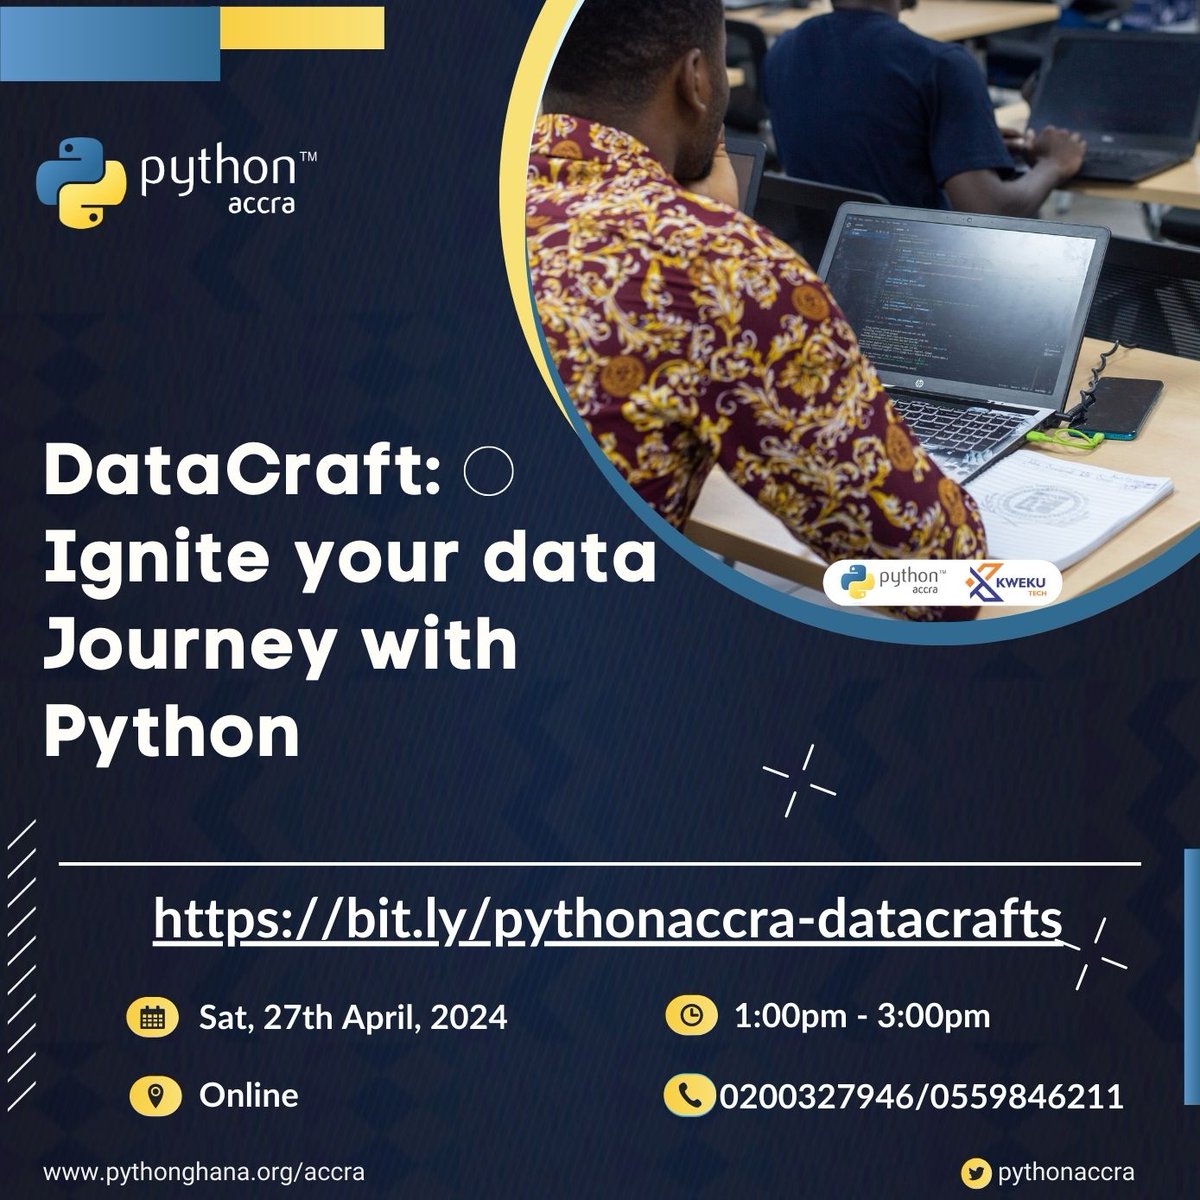 Python Accra presents the first session of Python for Data Science, a series designed to introduce participants to the fundamentals of data science using Python. Register here to reserve your spot🔗: bit.ly/pythonaccra-da…